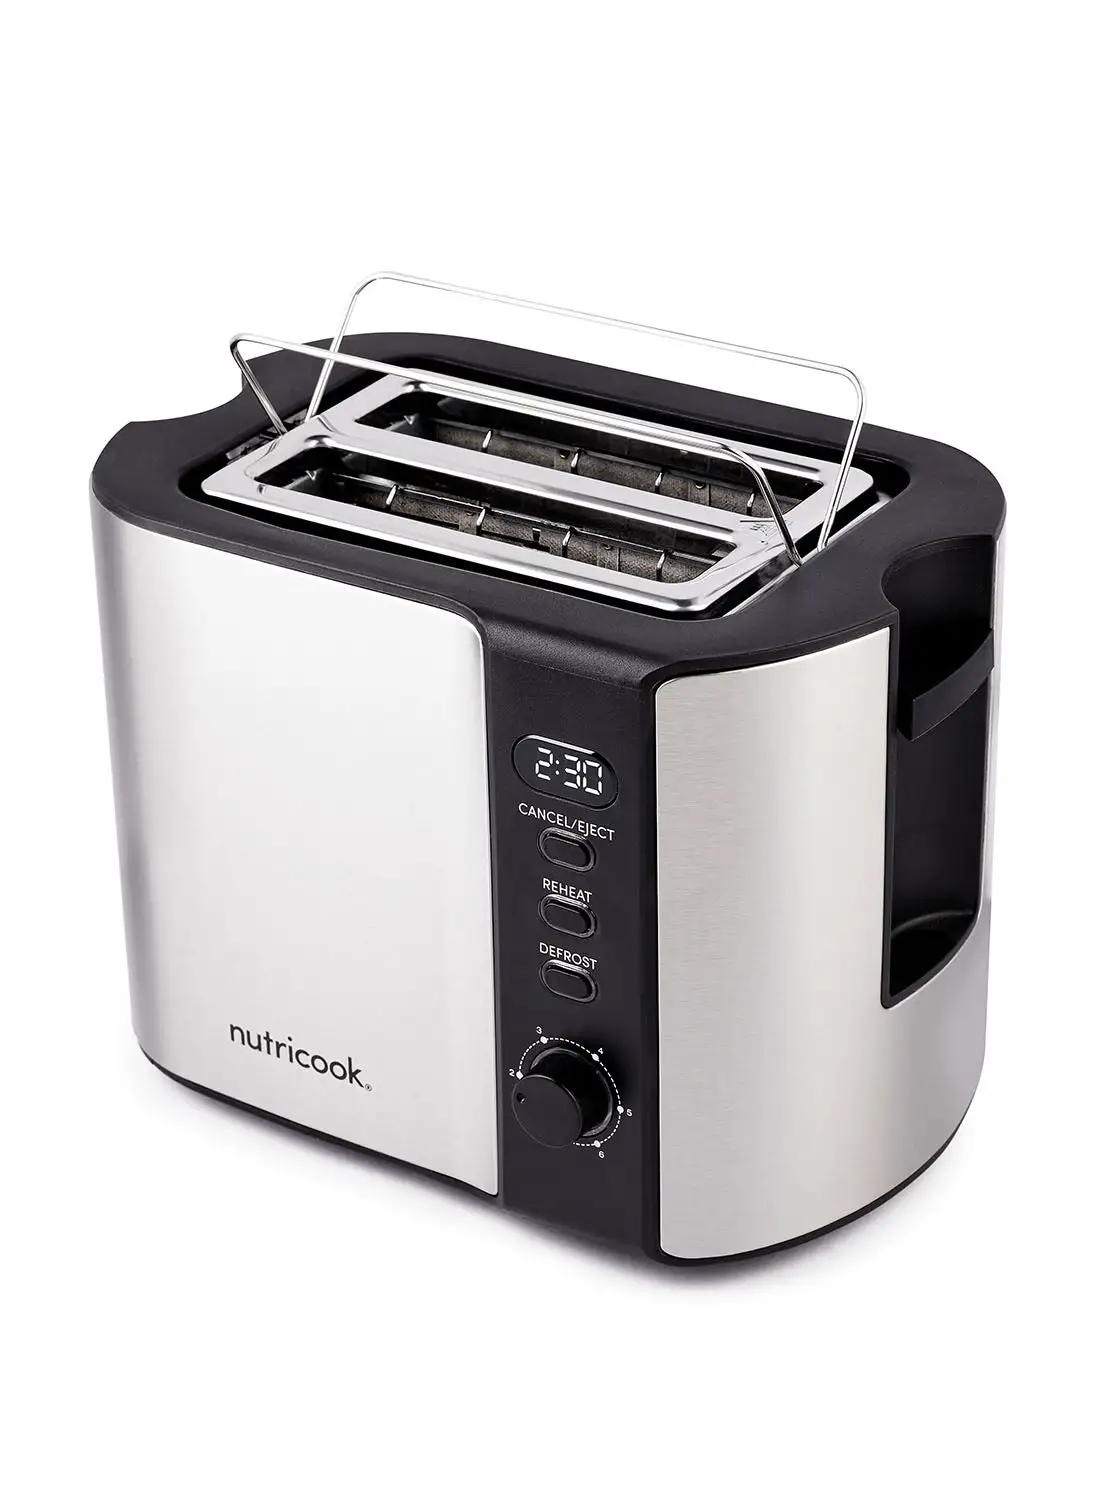 nutricook Digital 2-Slice Toaster With LED Display, 2 Long & Extra Wide Slots, 6 Toasting Levels, Defrost/Reheat/Cancel, Removable Crumb Tray, 2 Years Warranty 800 W NC-T102S Silver